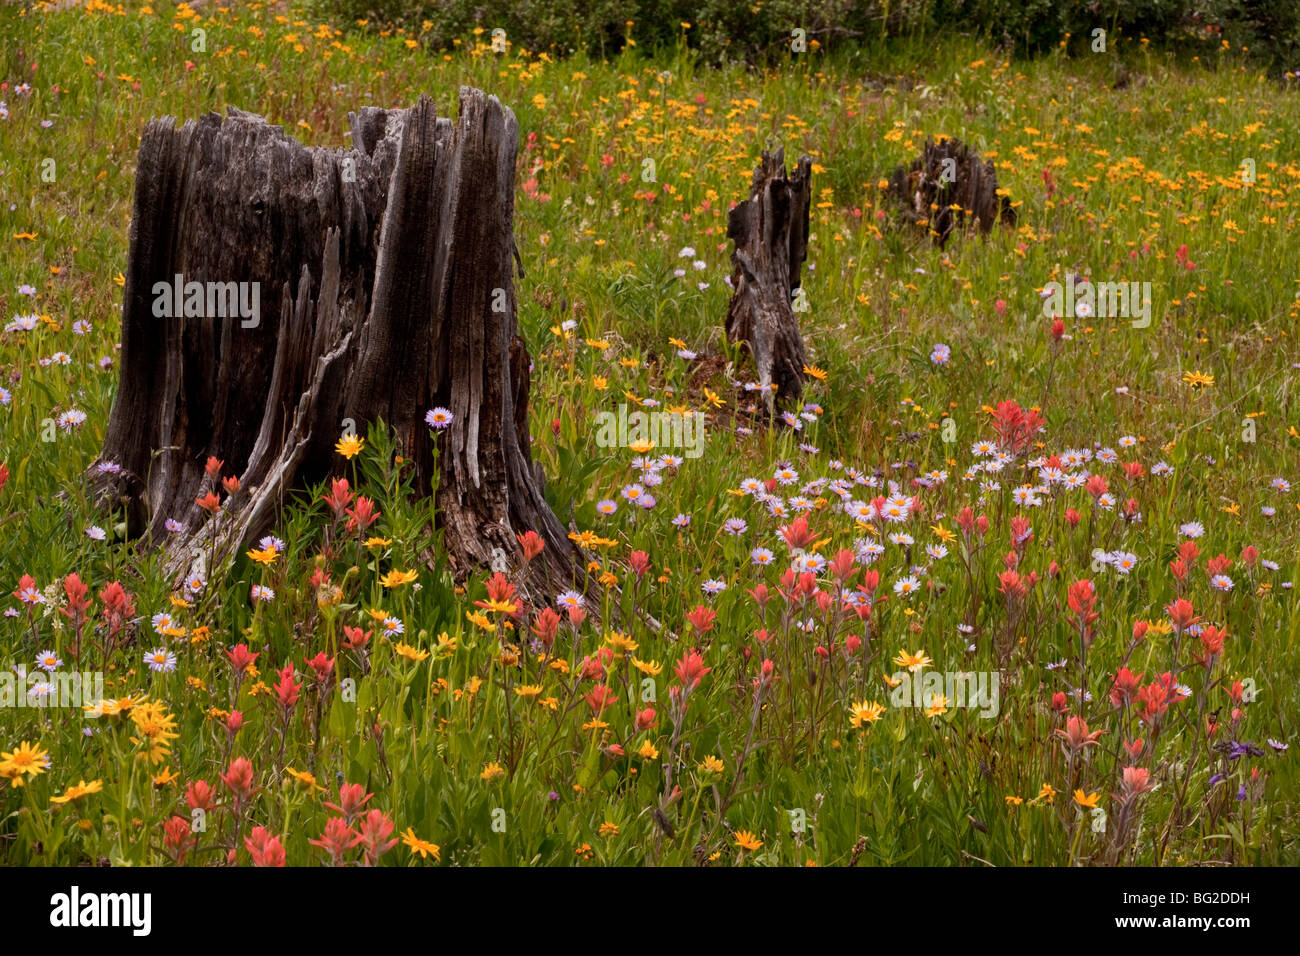 Spectacular early summer flowers, including arnica, aster, paintbrush etc, among old felled trees, on Shrine Pass, Rockies, Co Stock Photo